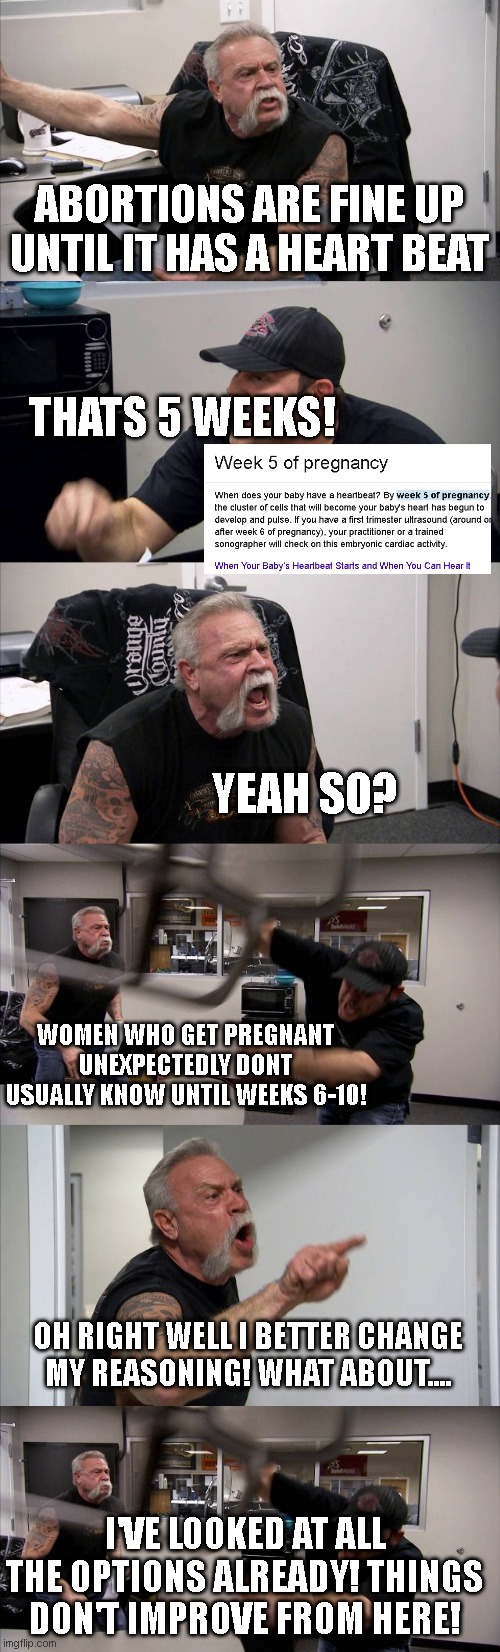 ABORTIONS ARE FINE UP UNTIL IT HAS A HEART BEAT; THATS 5 WEEKS! YEAH SO? WOMEN WHO GET PREGNANT UNEXPECTEDLY DONT USUALLY KNOW UNTIL WEEKS 6-10! OH RIGHT WELL I BETTER CHANGE MY REASONING! WHAT ABOUT.... I'VE LOOKED AT ALL THE OPTIONS ALREADY! THINGS DON'T IMPROVE FROM HERE! | image tagged in memes,american chopper argument | made w/ Imgflip meme maker